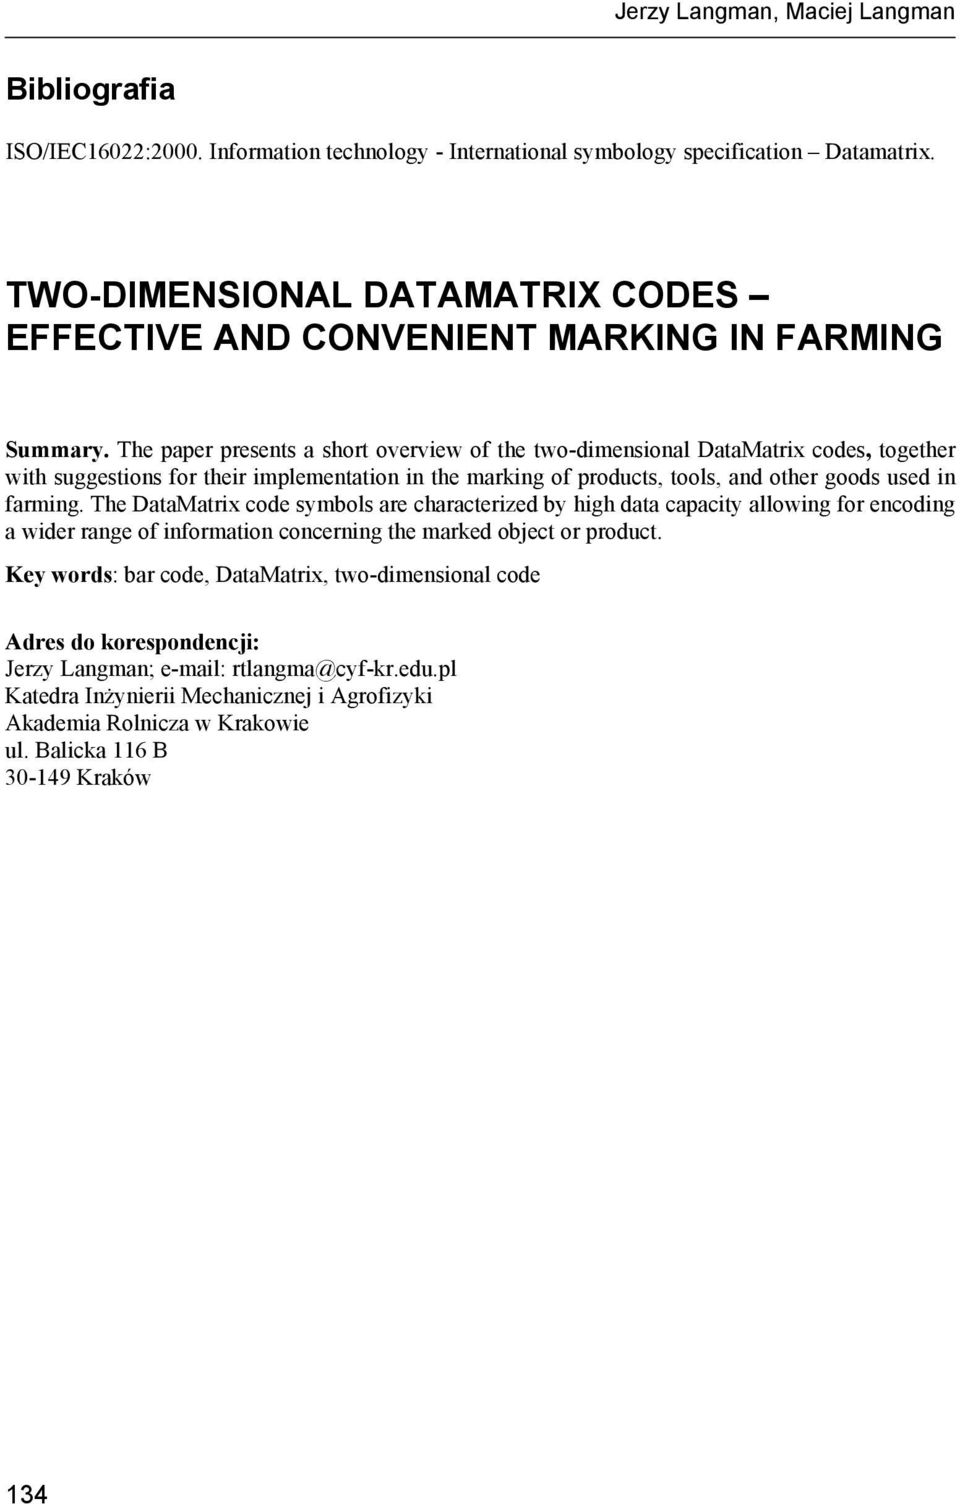 The paper presents a short overview of the two-dimensional DataMatrix codes, together with suggestions for their implementation in the marking of products, tools, and other goods used in farming.